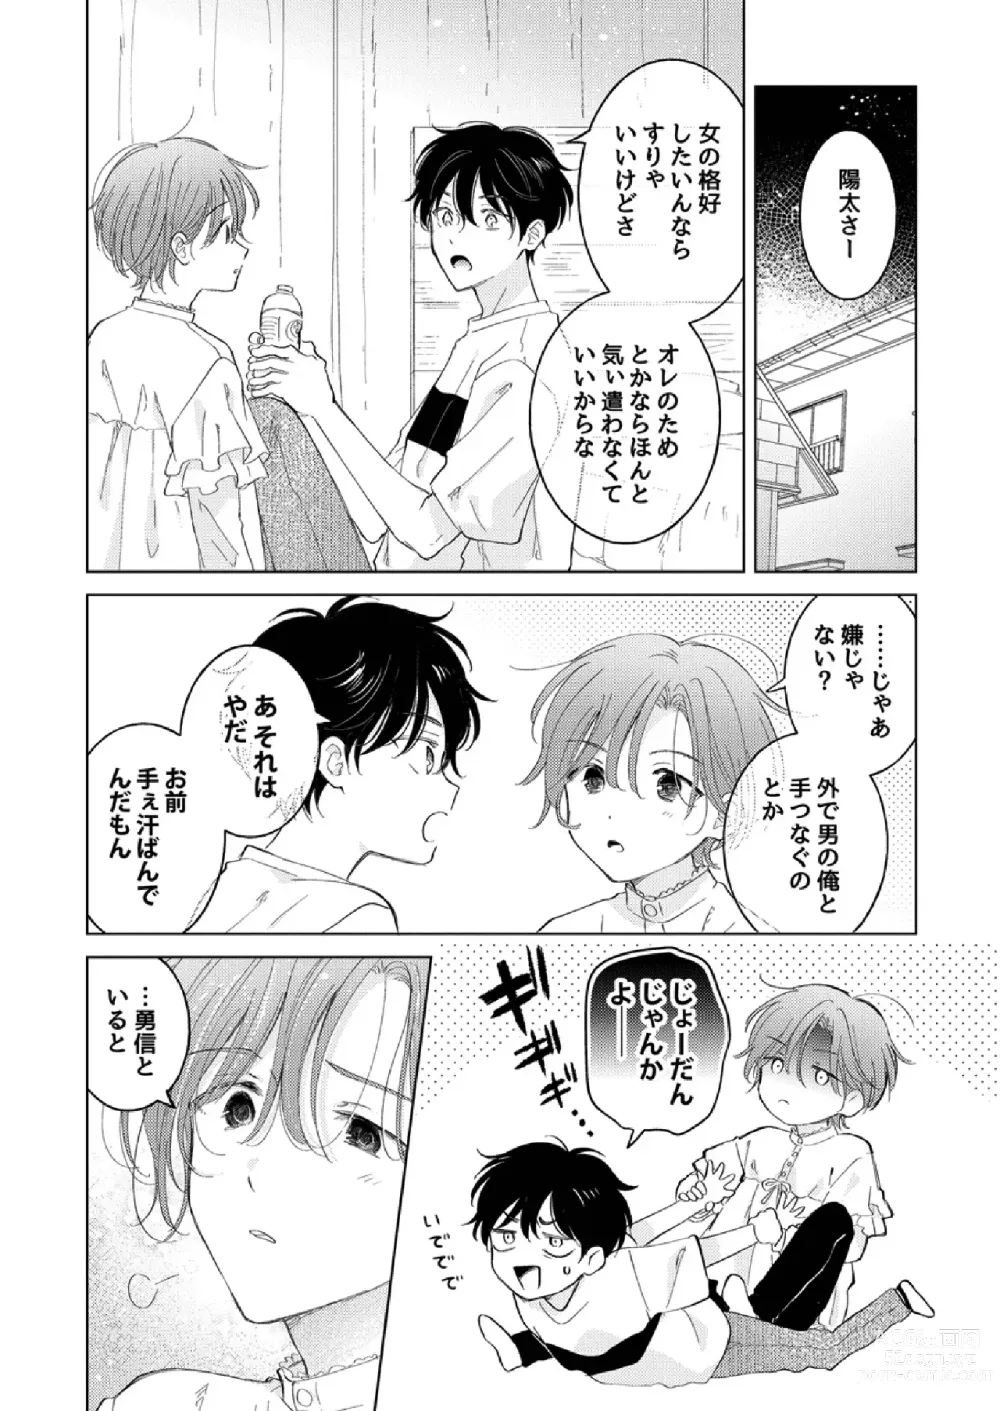 Page 30 of doujinshi How to use Gender-Changing Apps Properly 2